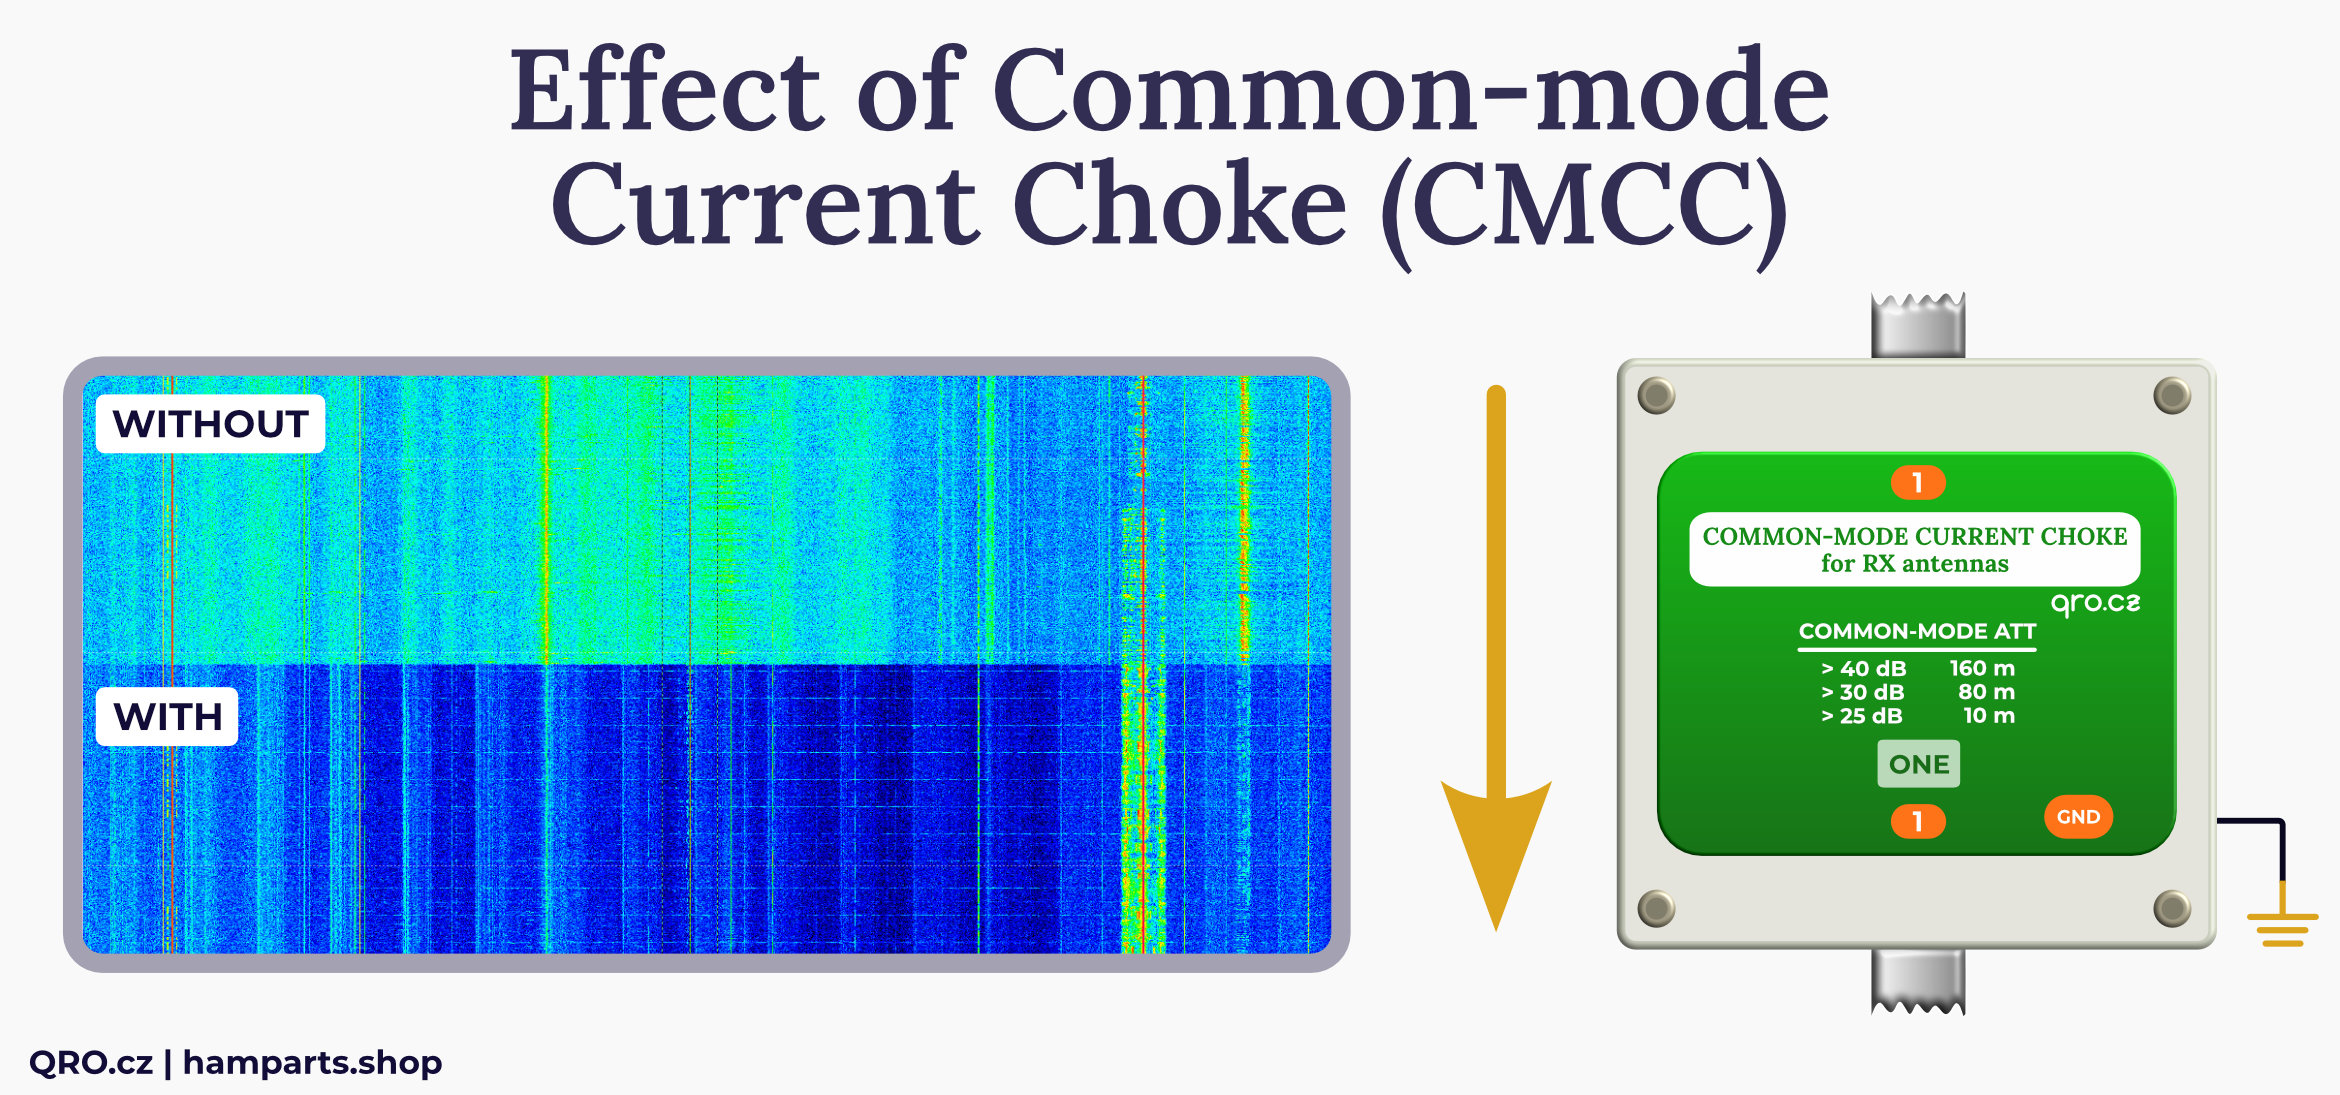 effect of common-mode current choke cmcc by qro.cz hamparts.shop